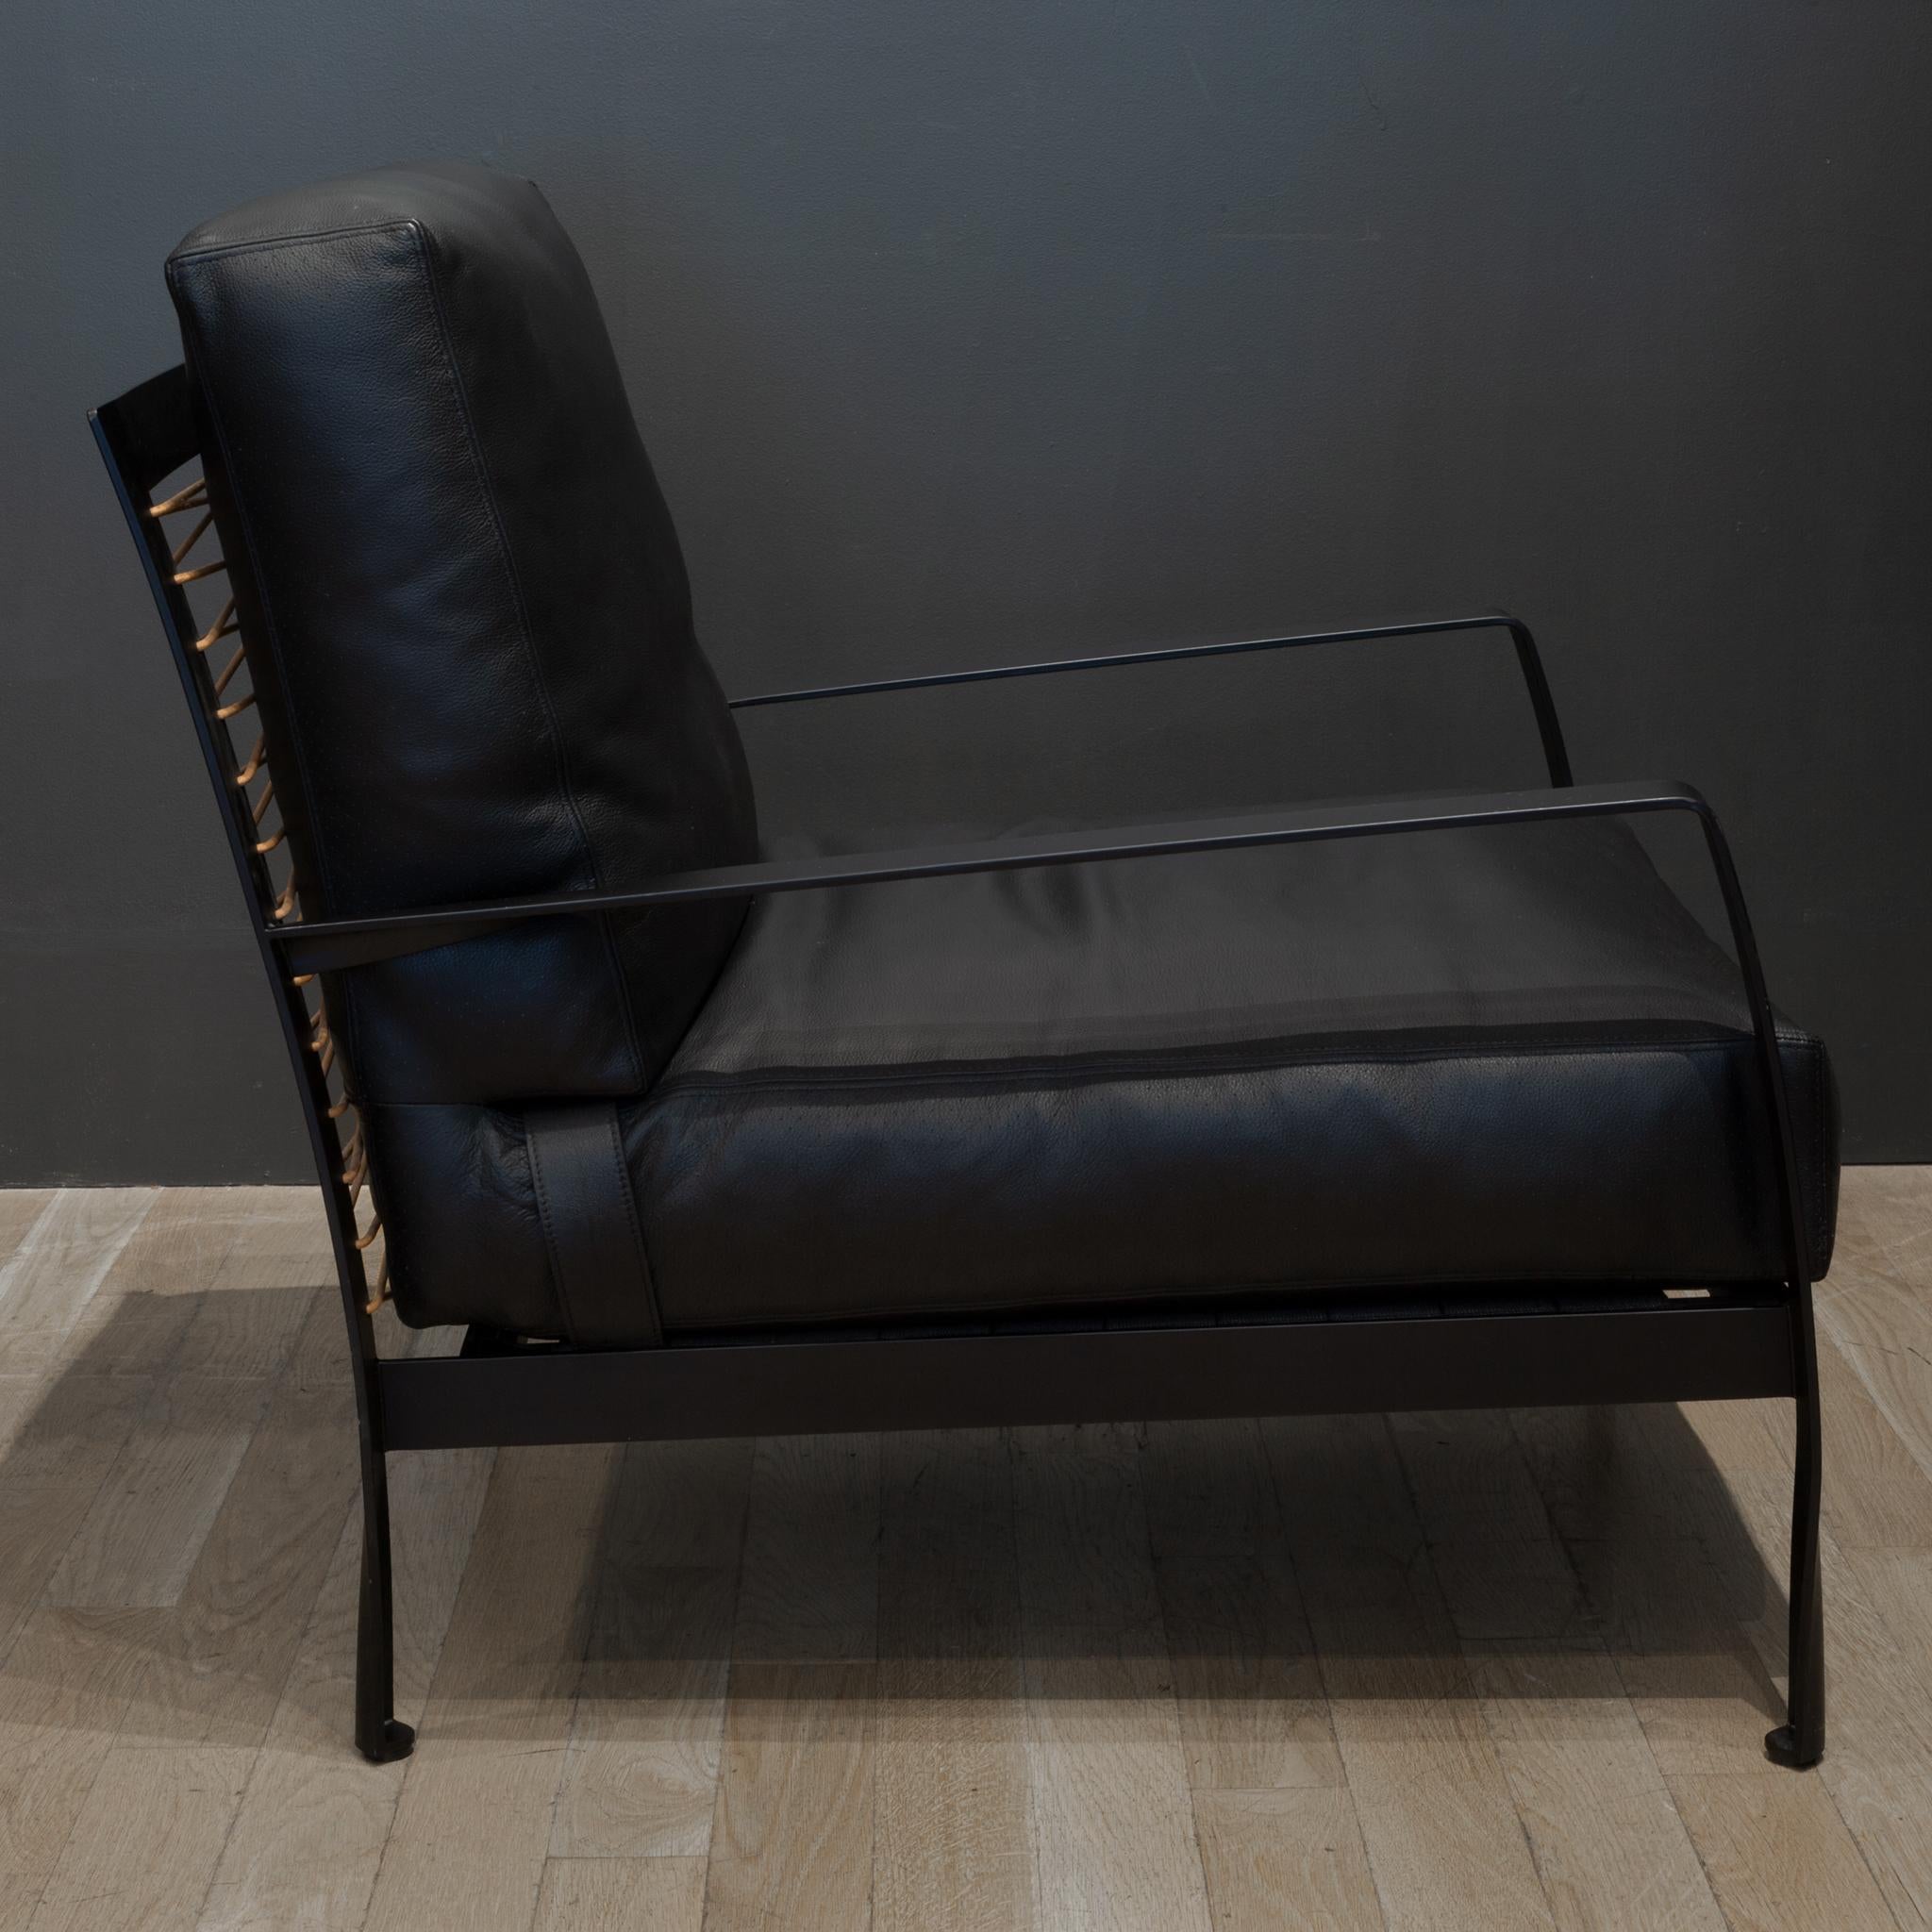 Lacquered Minotti Richards Leather Armchair, circa 2017